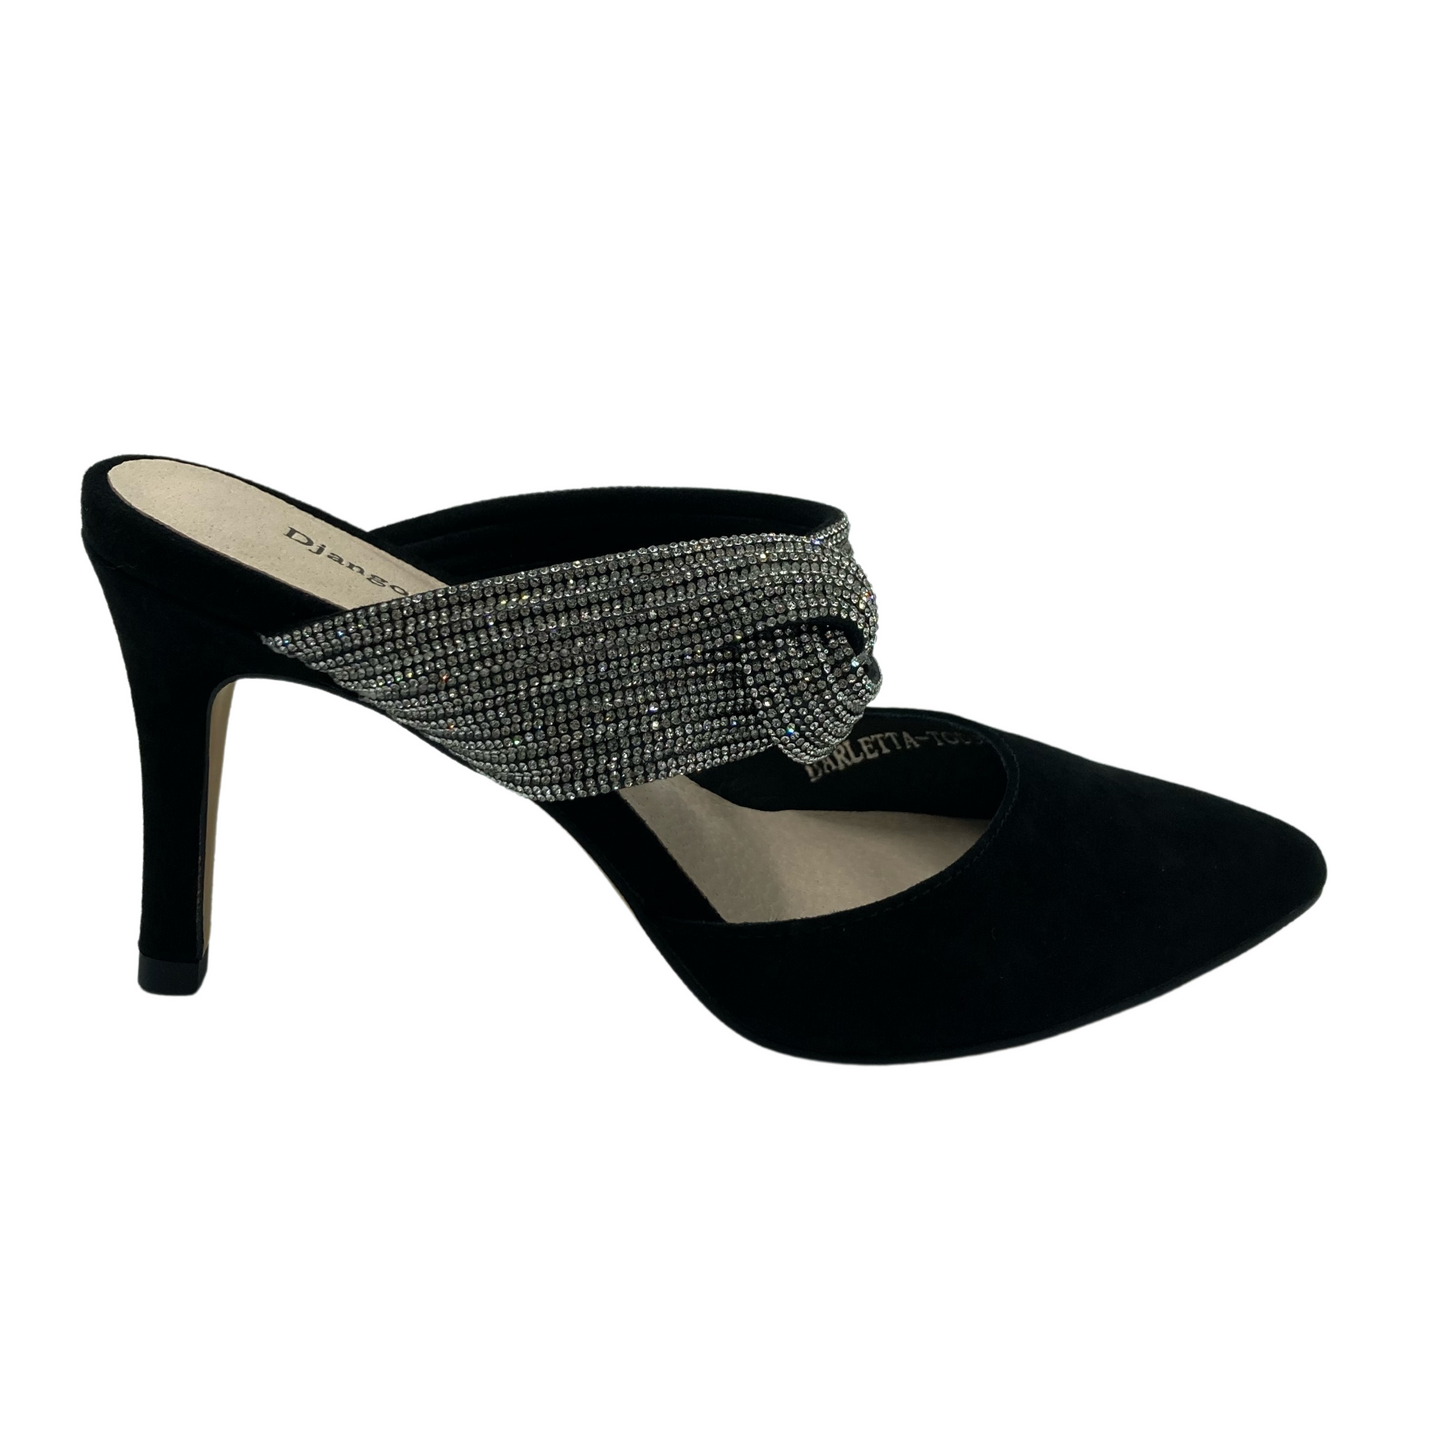 Right facing view of black suede heel with pointed toe.  Gem studded strap has knot detail